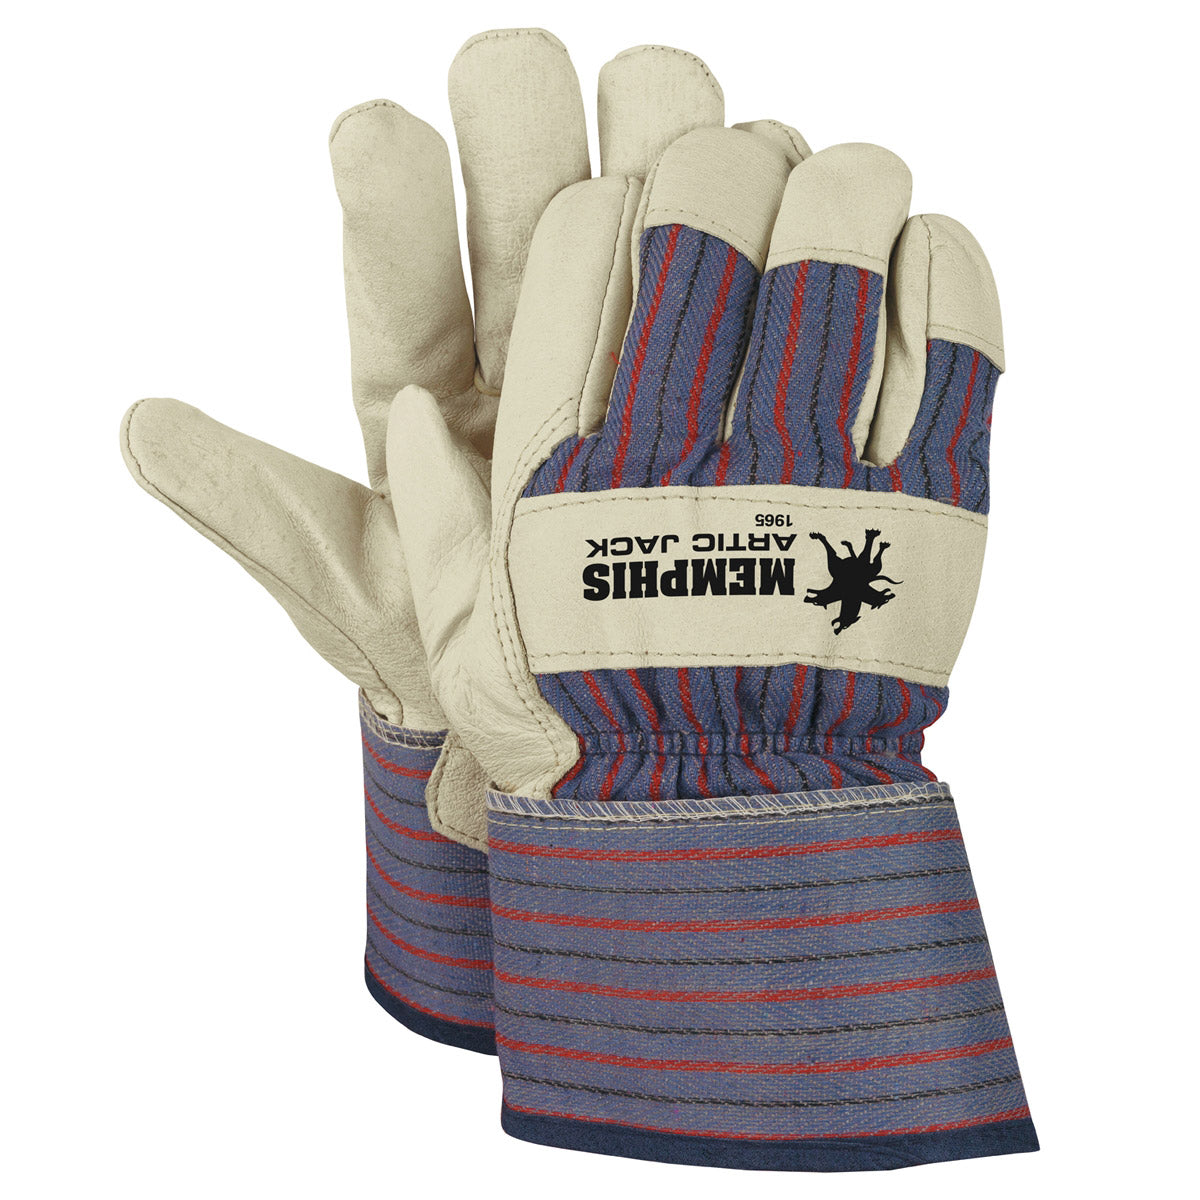 Memphis Arctic Jack, Thermosock Lined Pigskin Leather Gloves